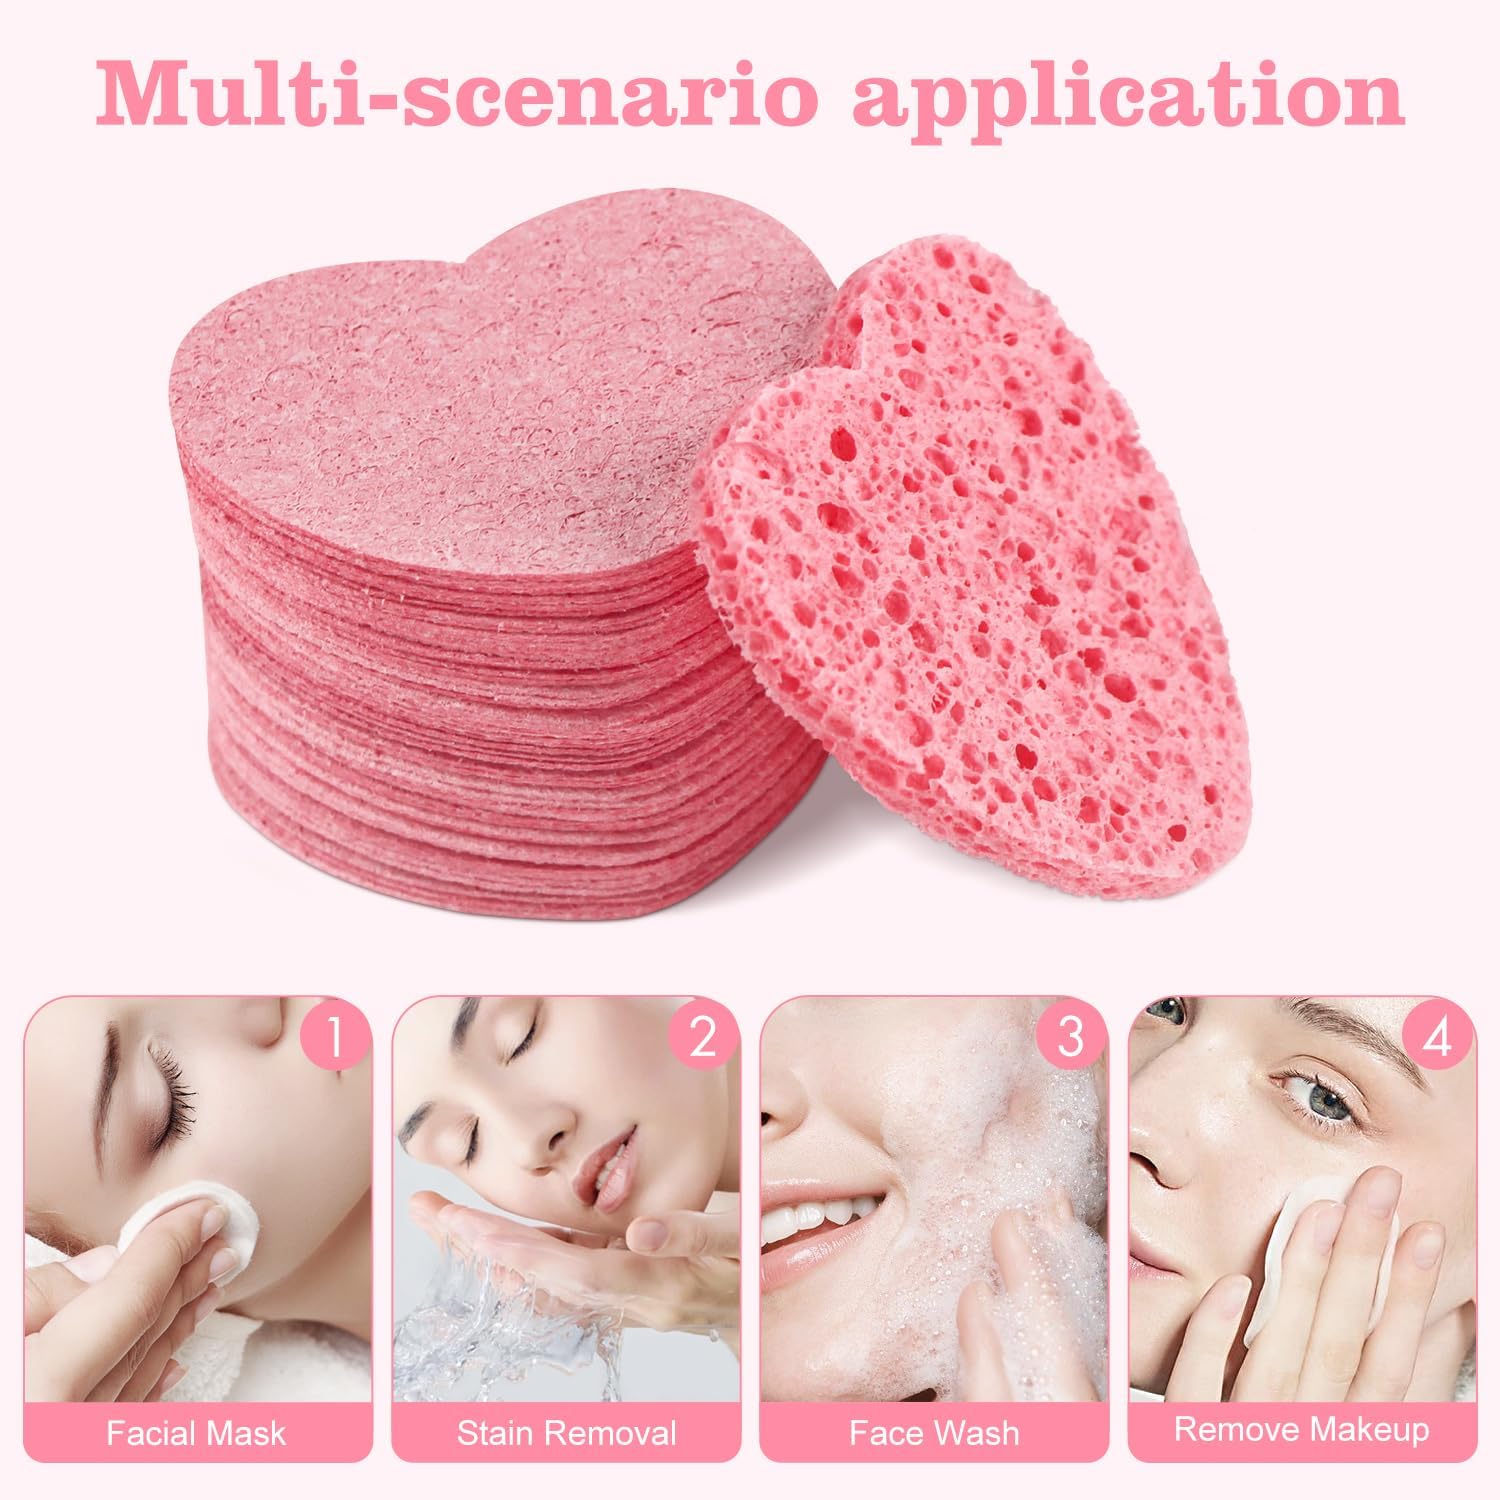 60-Count Compressed Facial Sponges with Container, Heart Shape Compressed Face Sponge, 100% Natural Sponge Pads for Face Cleansing, Massage, Pore Exfoliating Mask, Makeup Removal (Pink)